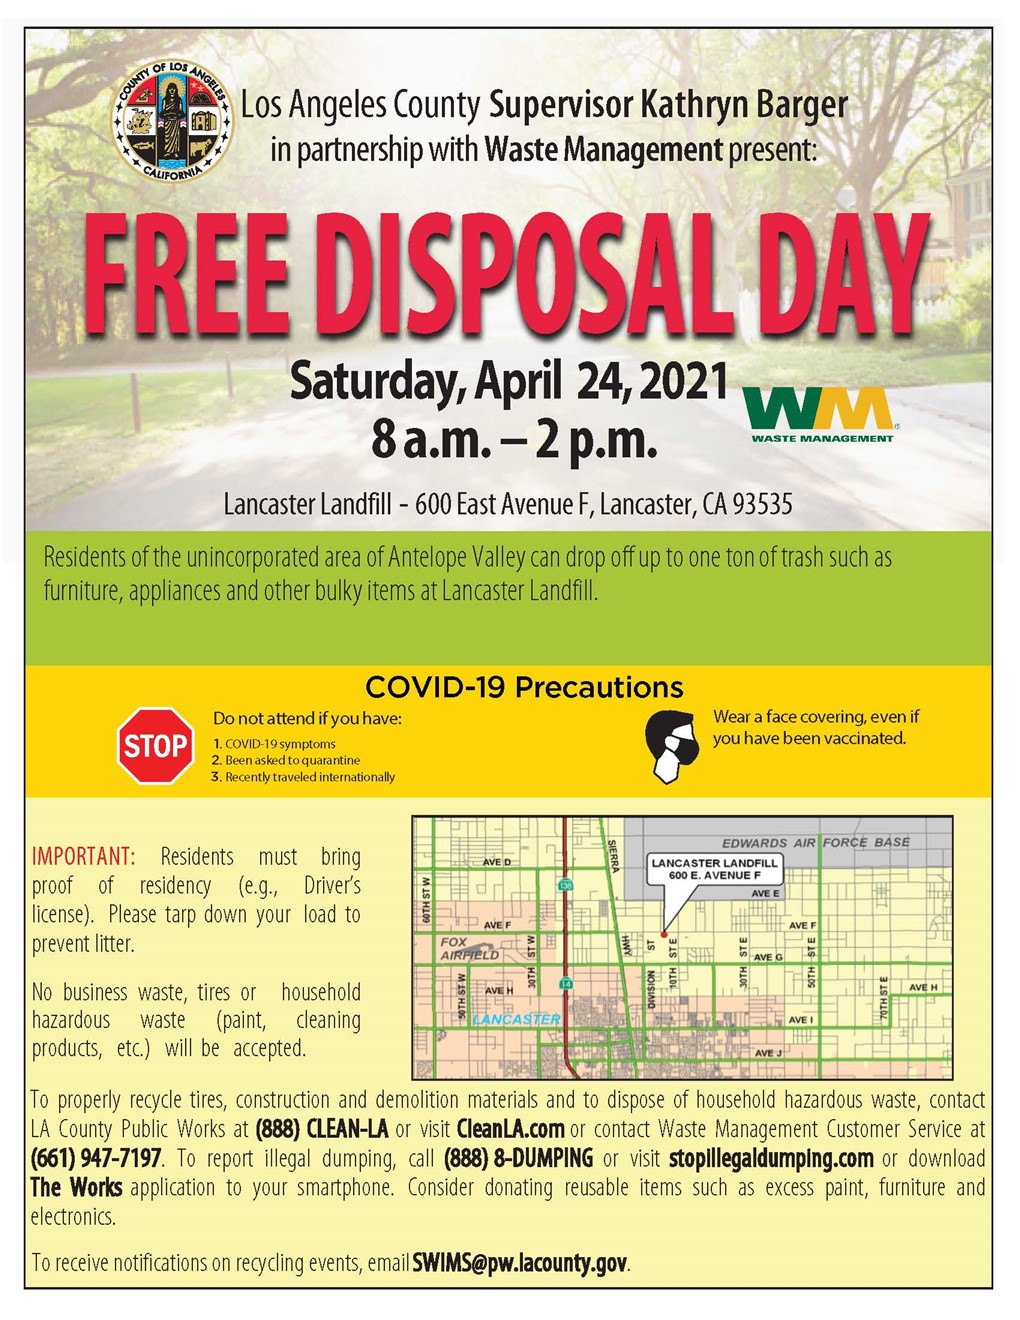 Free dump day April 24 for unincorporated communities in the AV